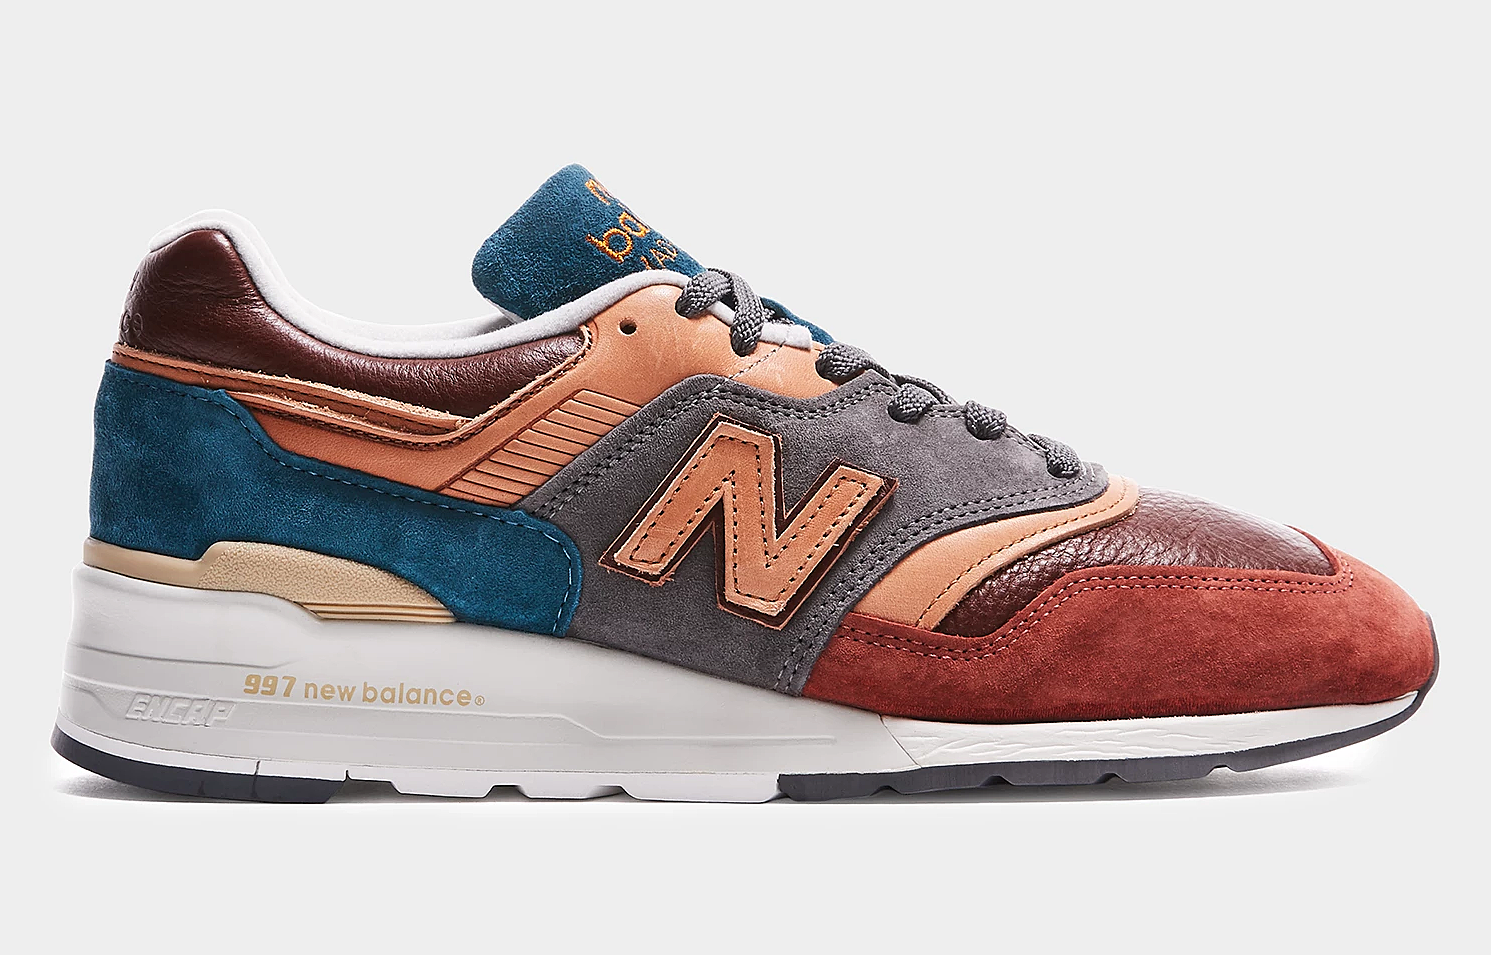 New Balance Releases 235 Sneakers Inspired By The Hudson Valley